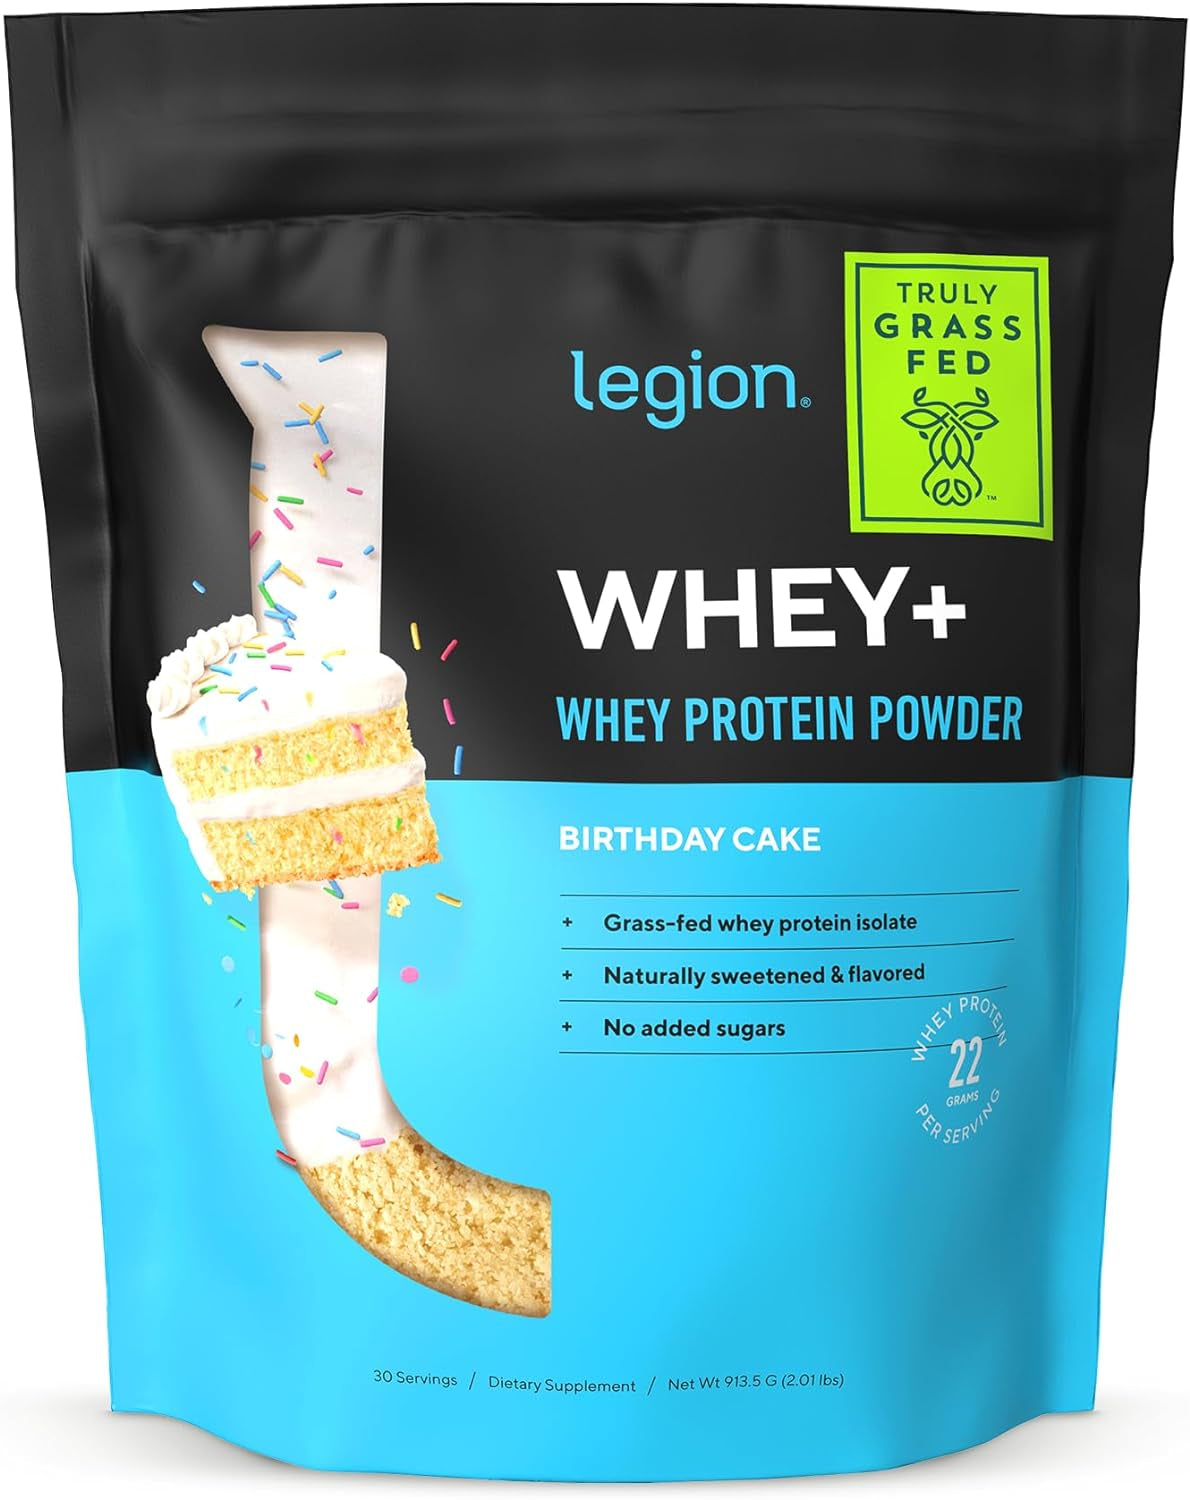 Whey+ Whey Isolate Protein Powder from Grass Fed Cows - Low Carb, Low Calorie, Non-Gmo, Lactose Free, Gluten Free, Sugar Free, All Natural Whey Protein Isolate, (30 Serving, Birthday Cake)